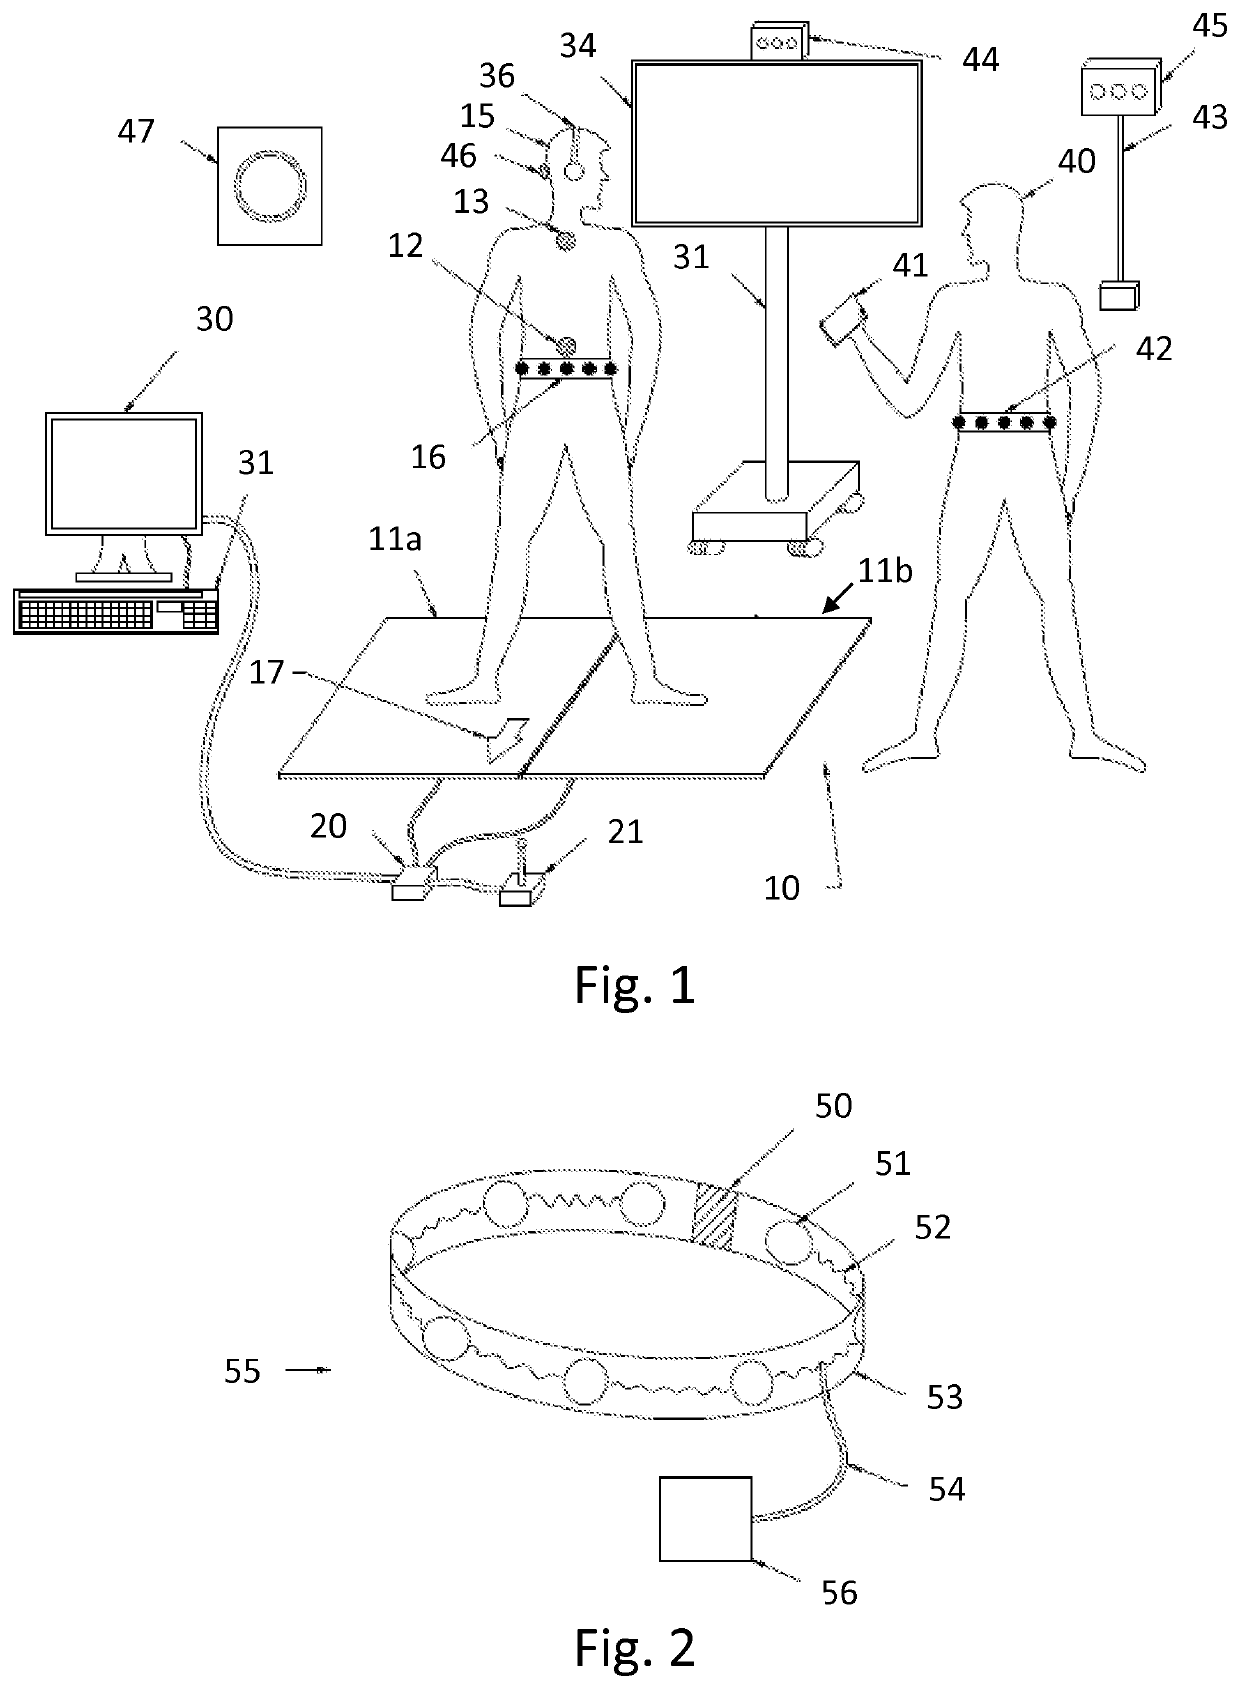 Multimodal sensory feedback system and method for treatment and assessment of disequilibrium, balance and motion disorders